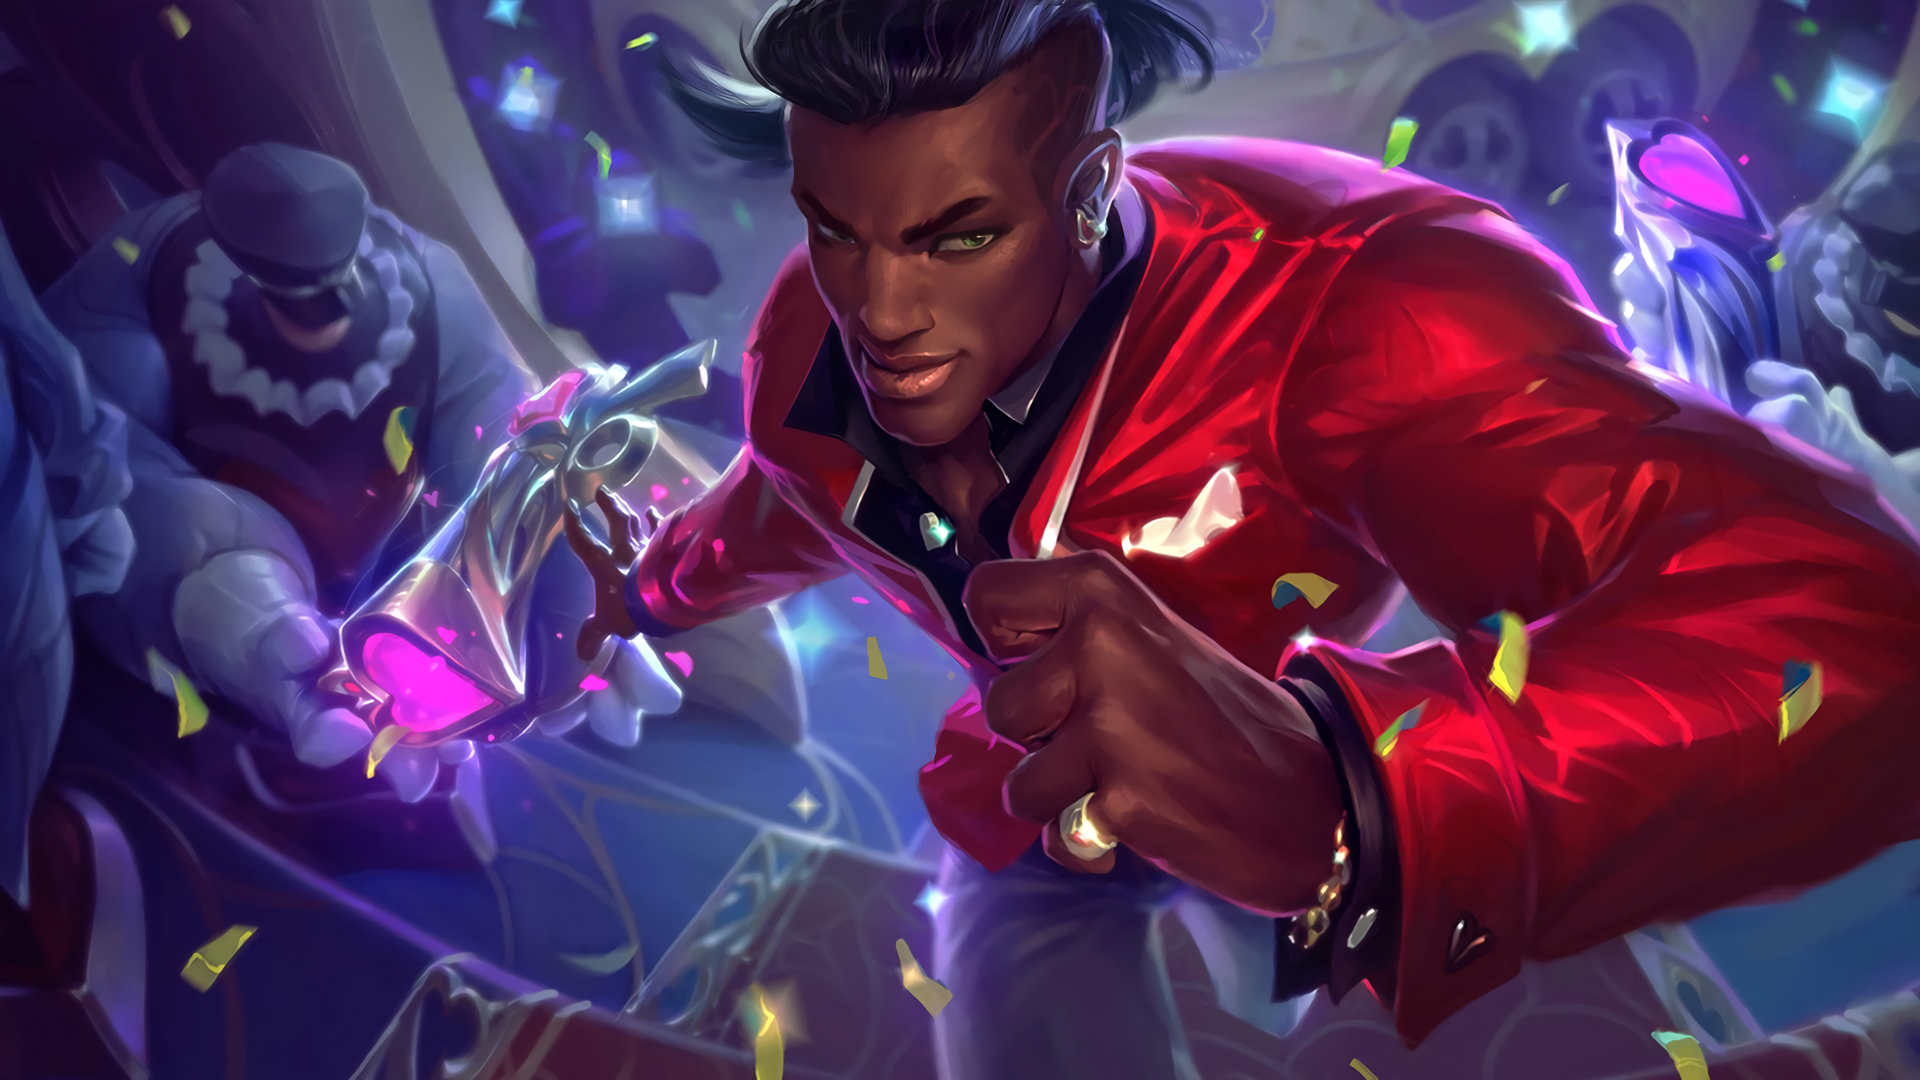 Valentines Day Lucian League Of Legends Men PC Gaming Artwork 1920x1080